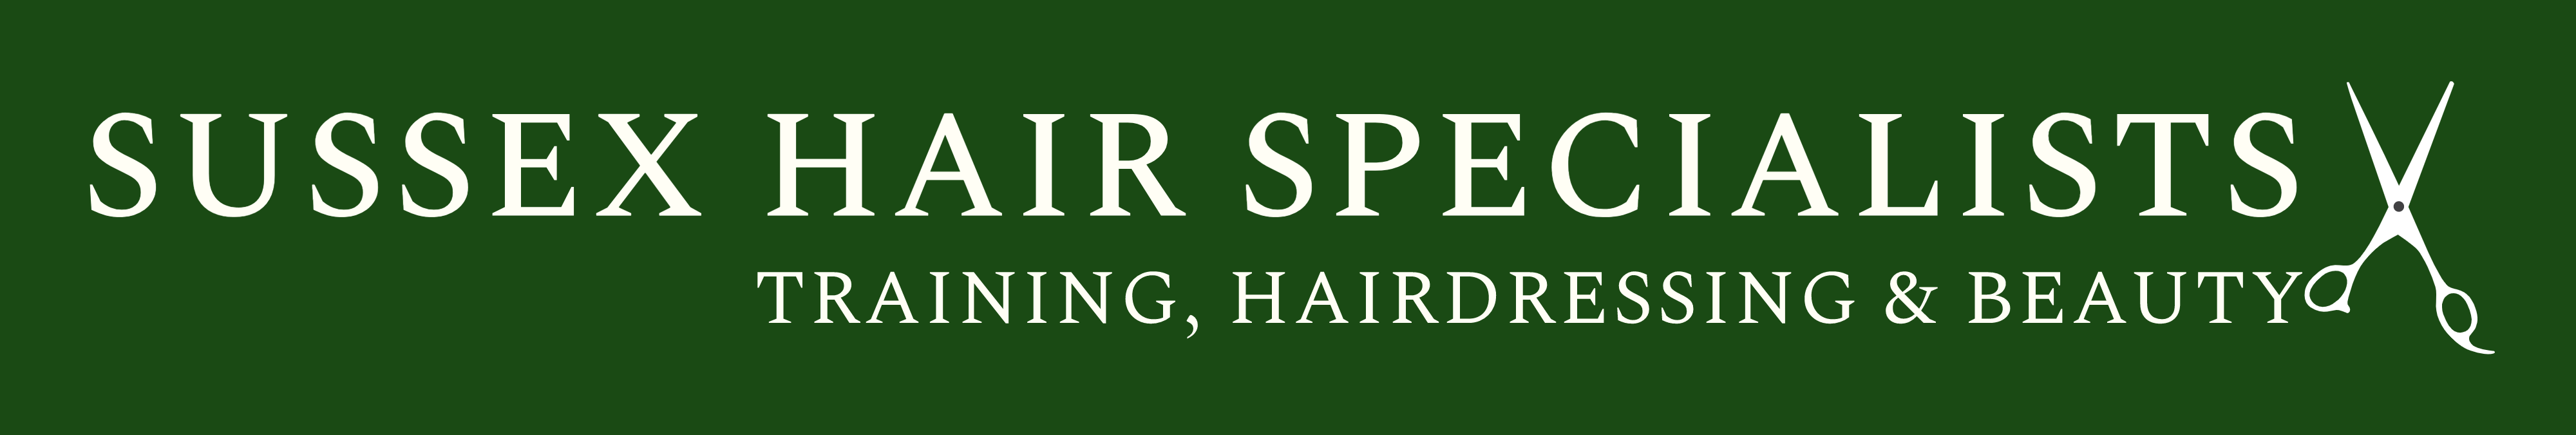 Sussex Hair Specialists